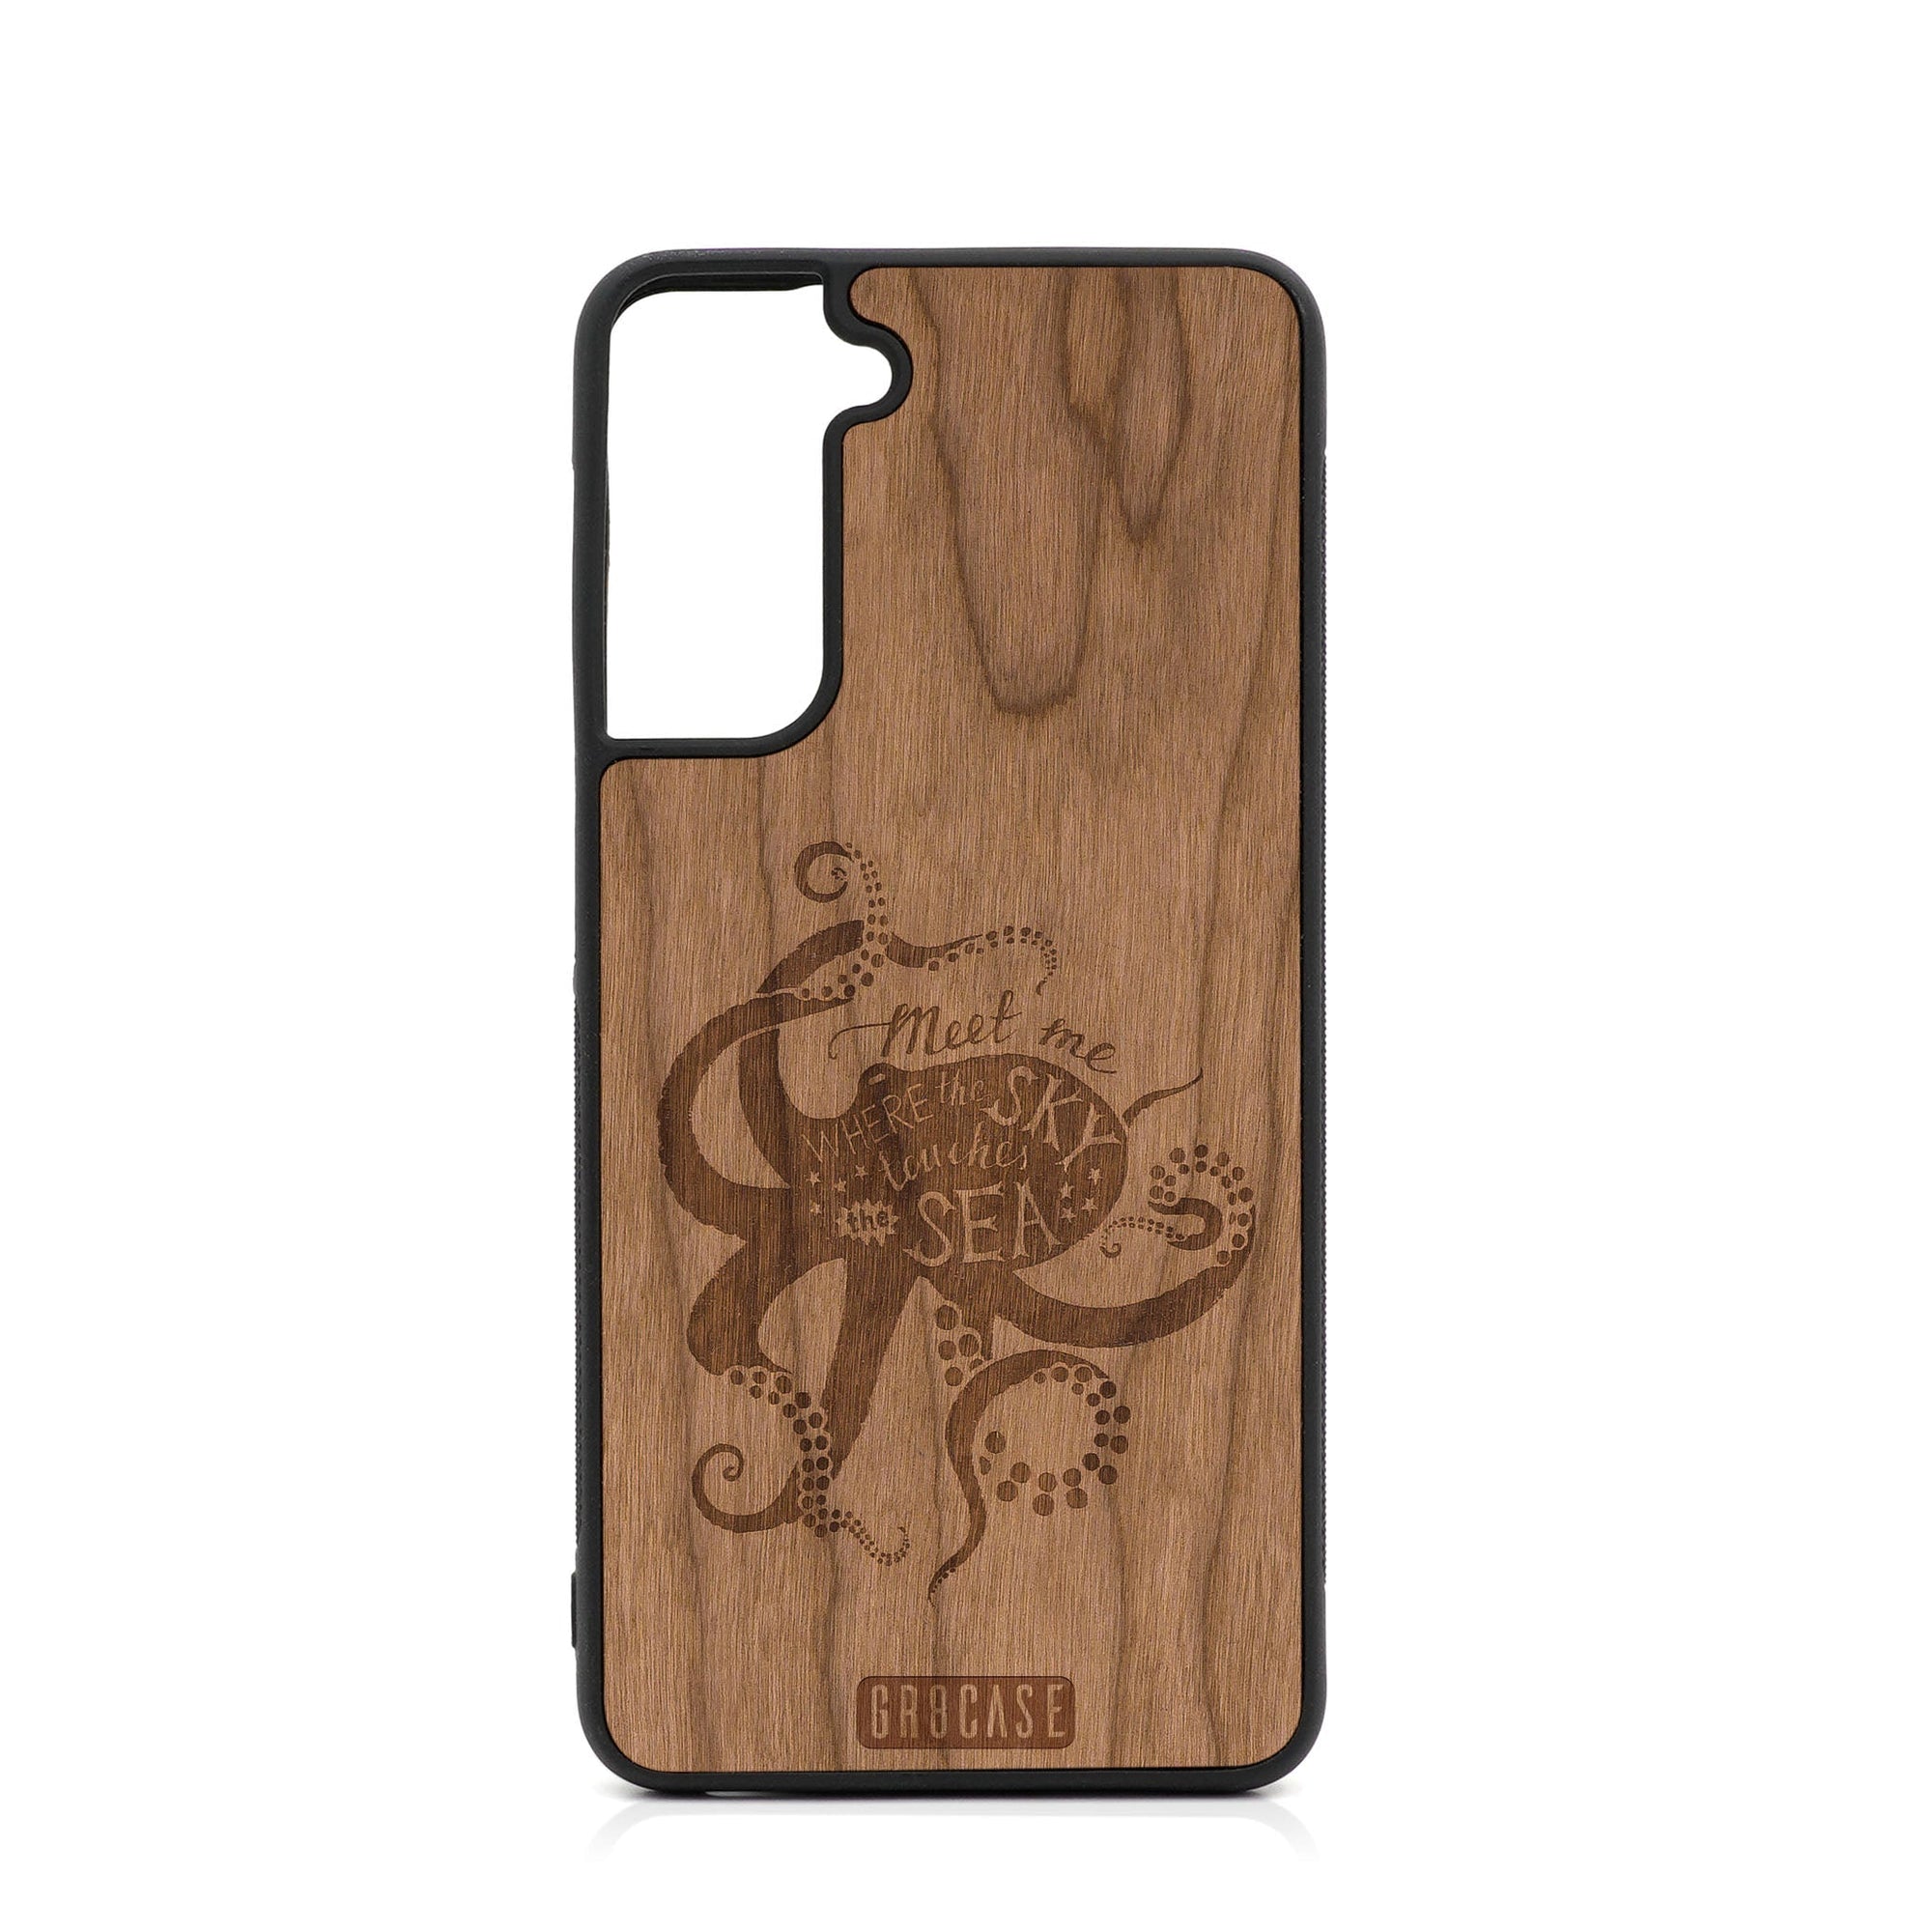 Meet Me Where The Sky Touches The Sea (Octopus) Design Wood Case For Samsung Galaxy S21 FE 5G